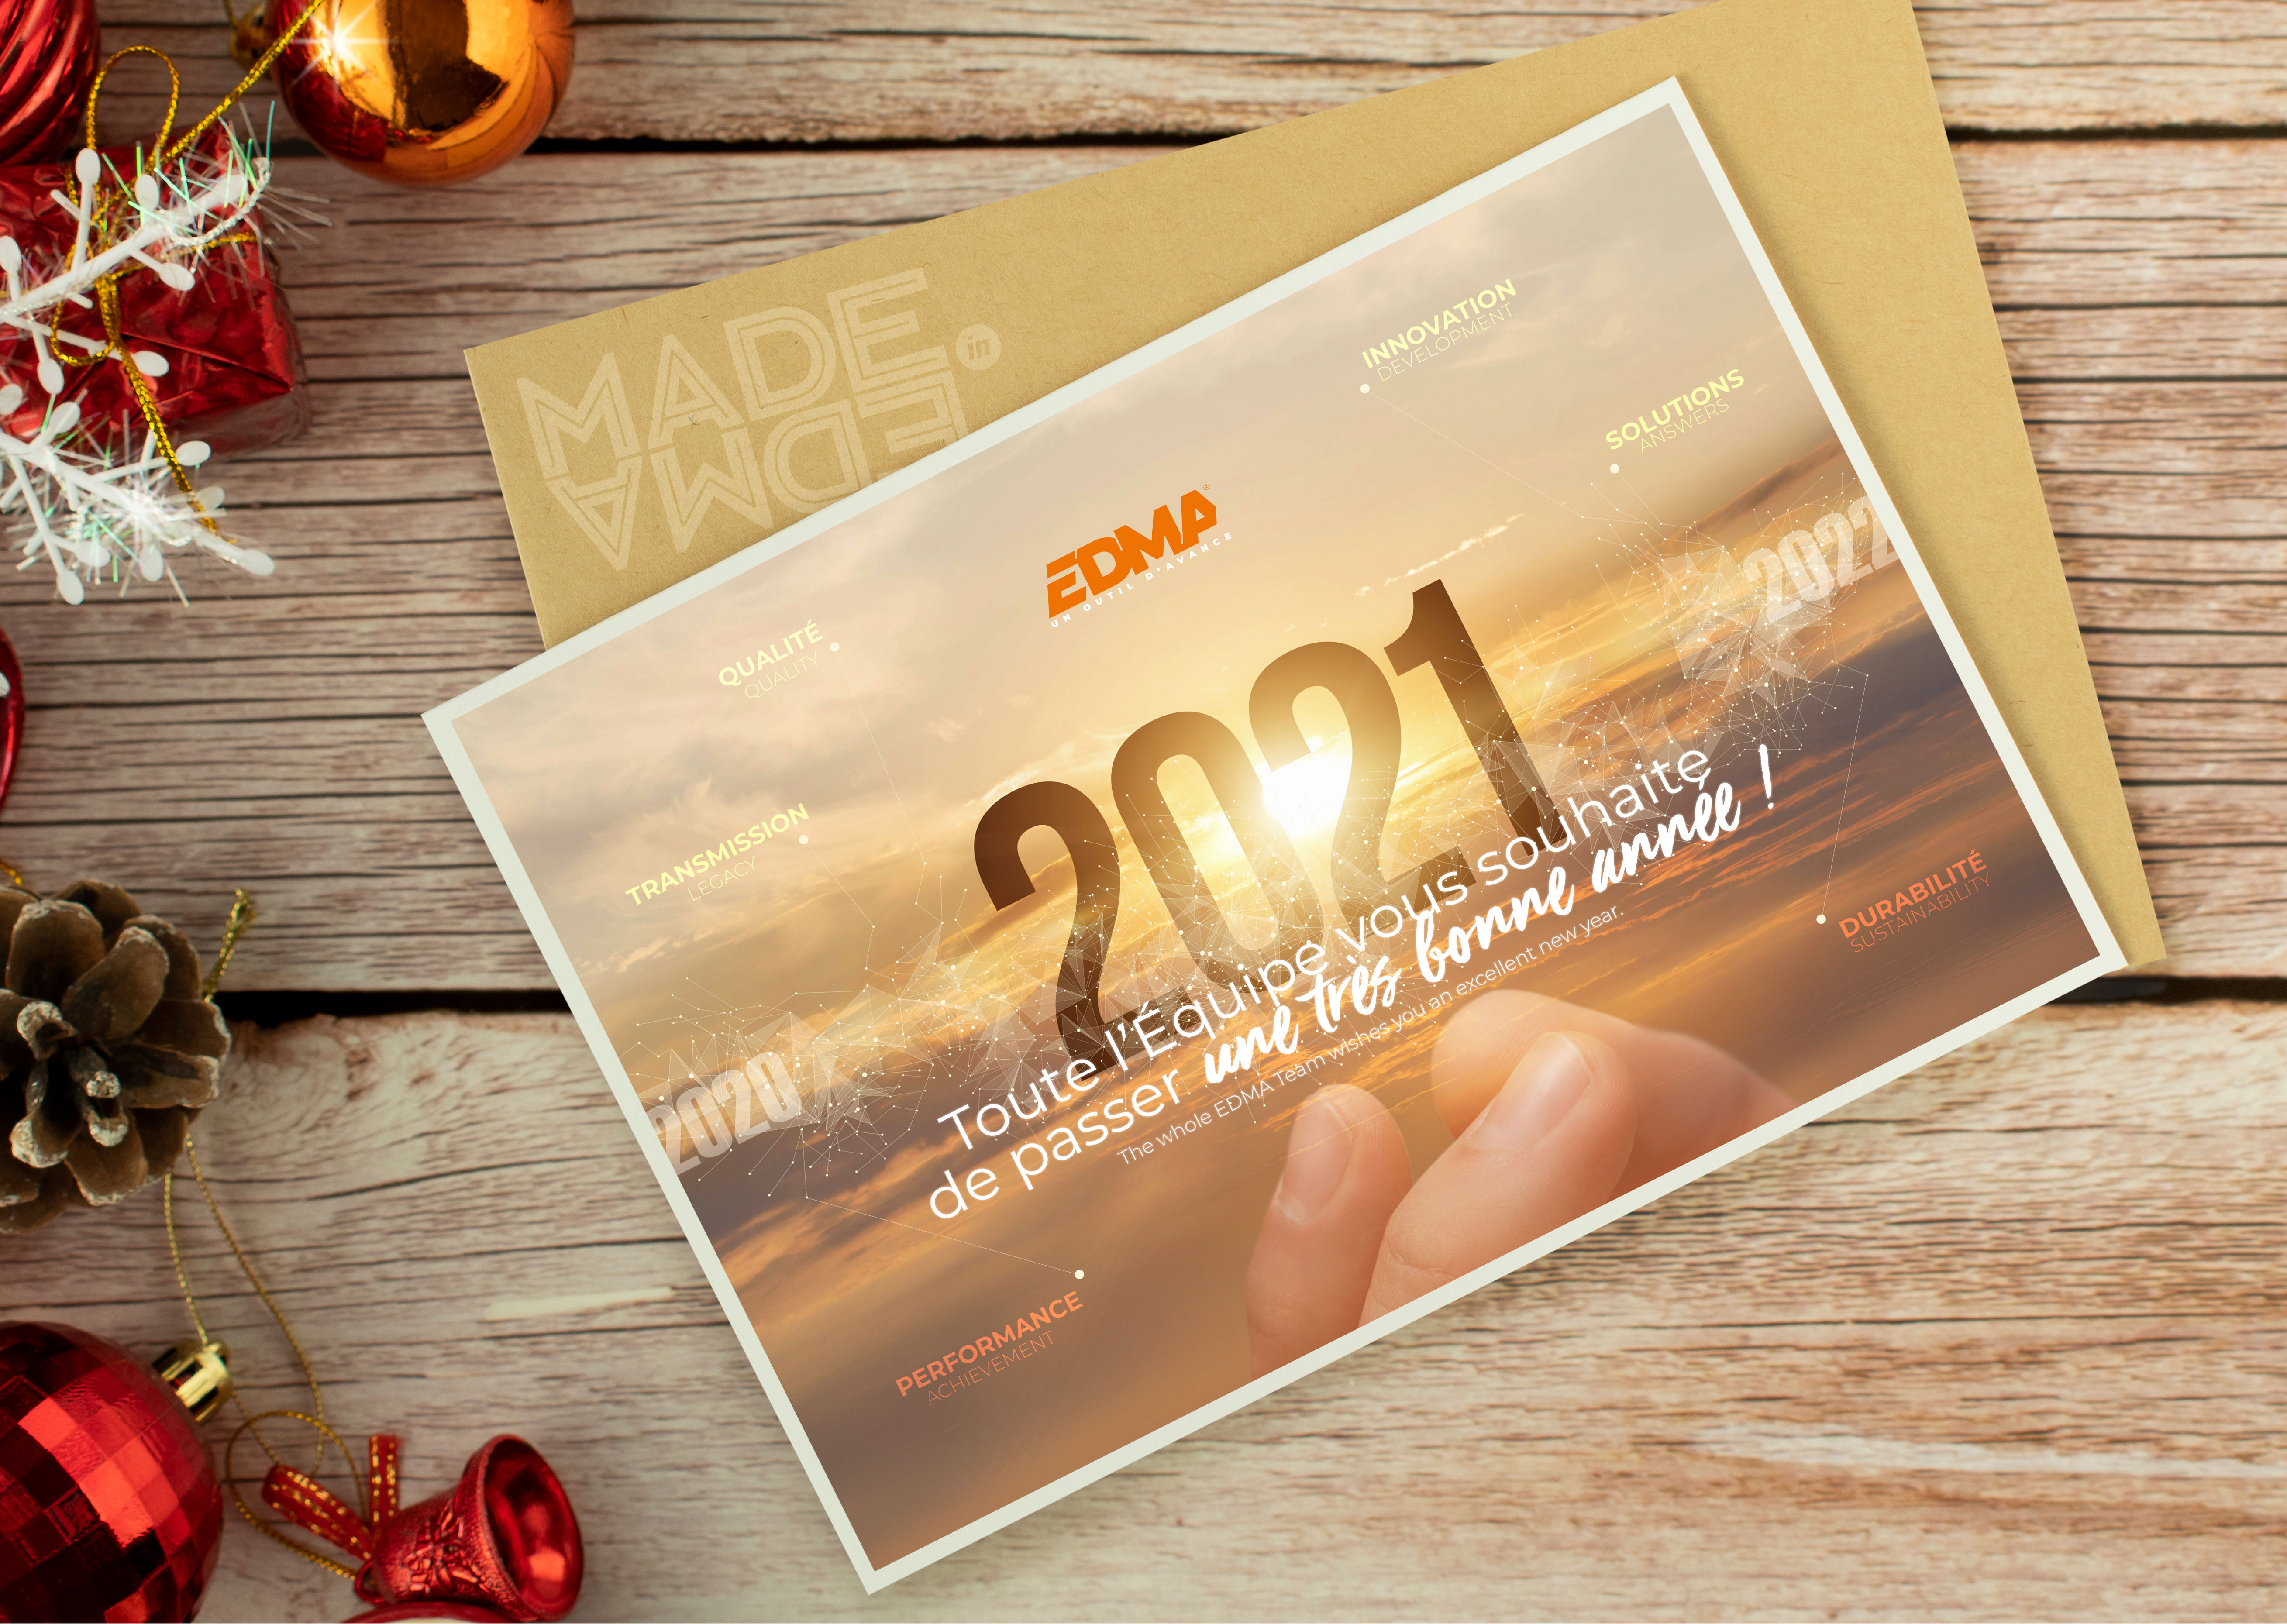 EDMA wishes you a happy new year 2021